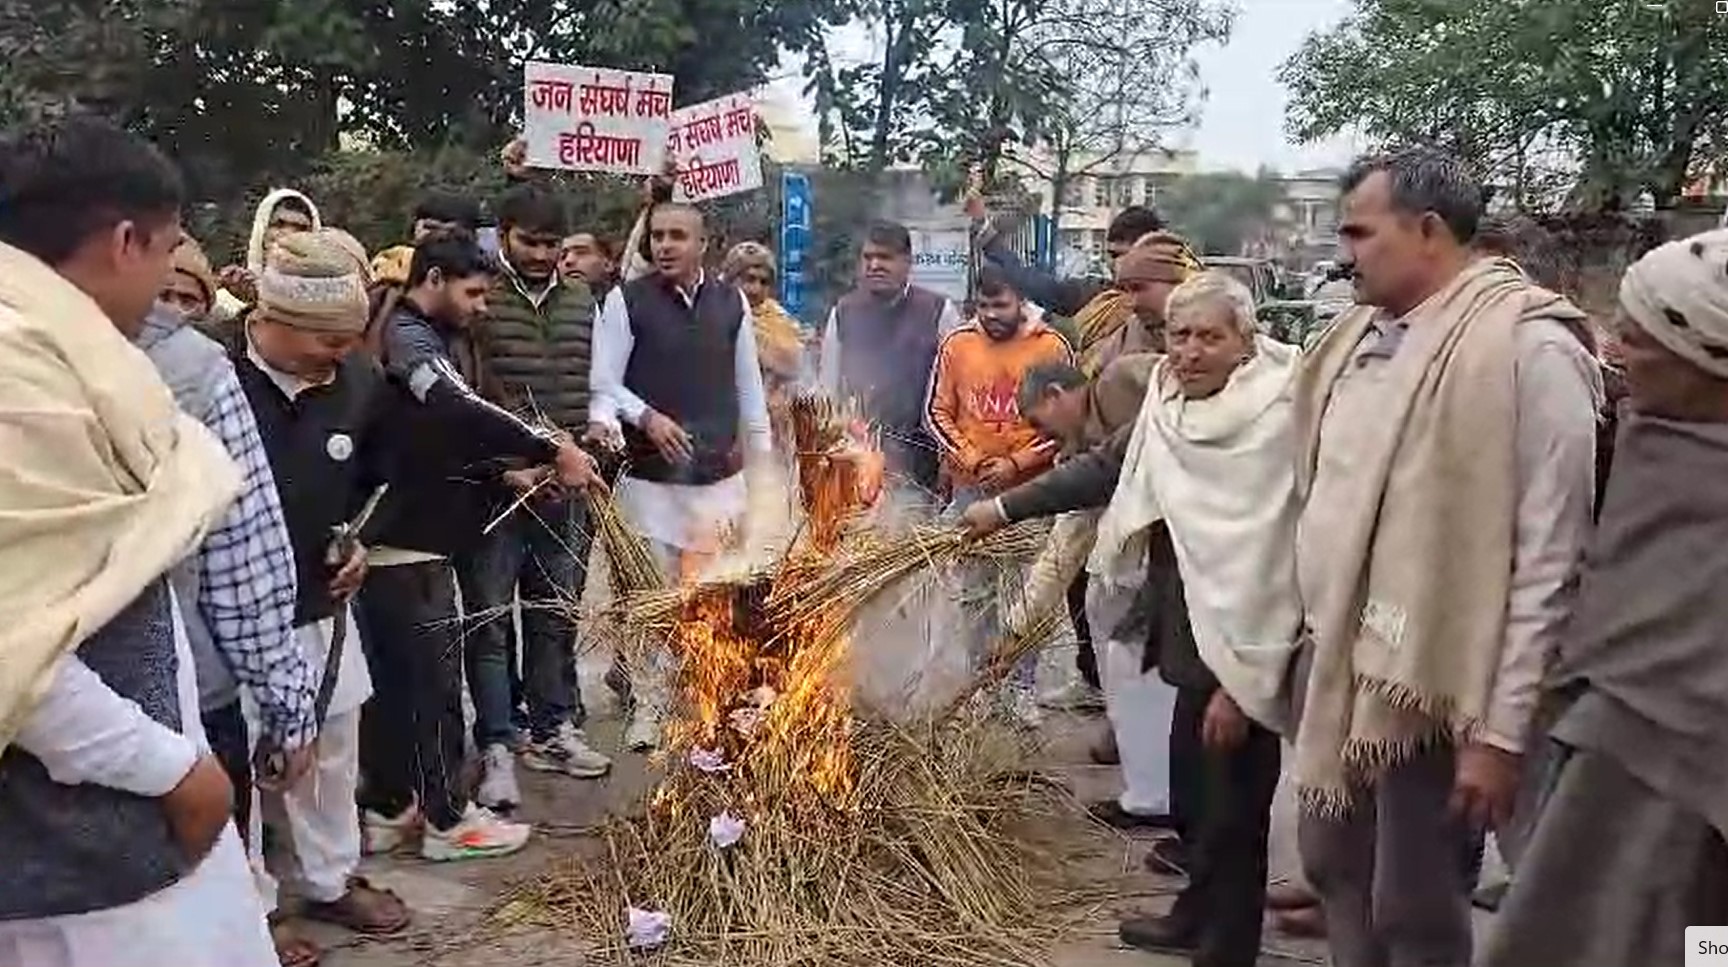 effigy of IAS officer and agriculture advisor burnt